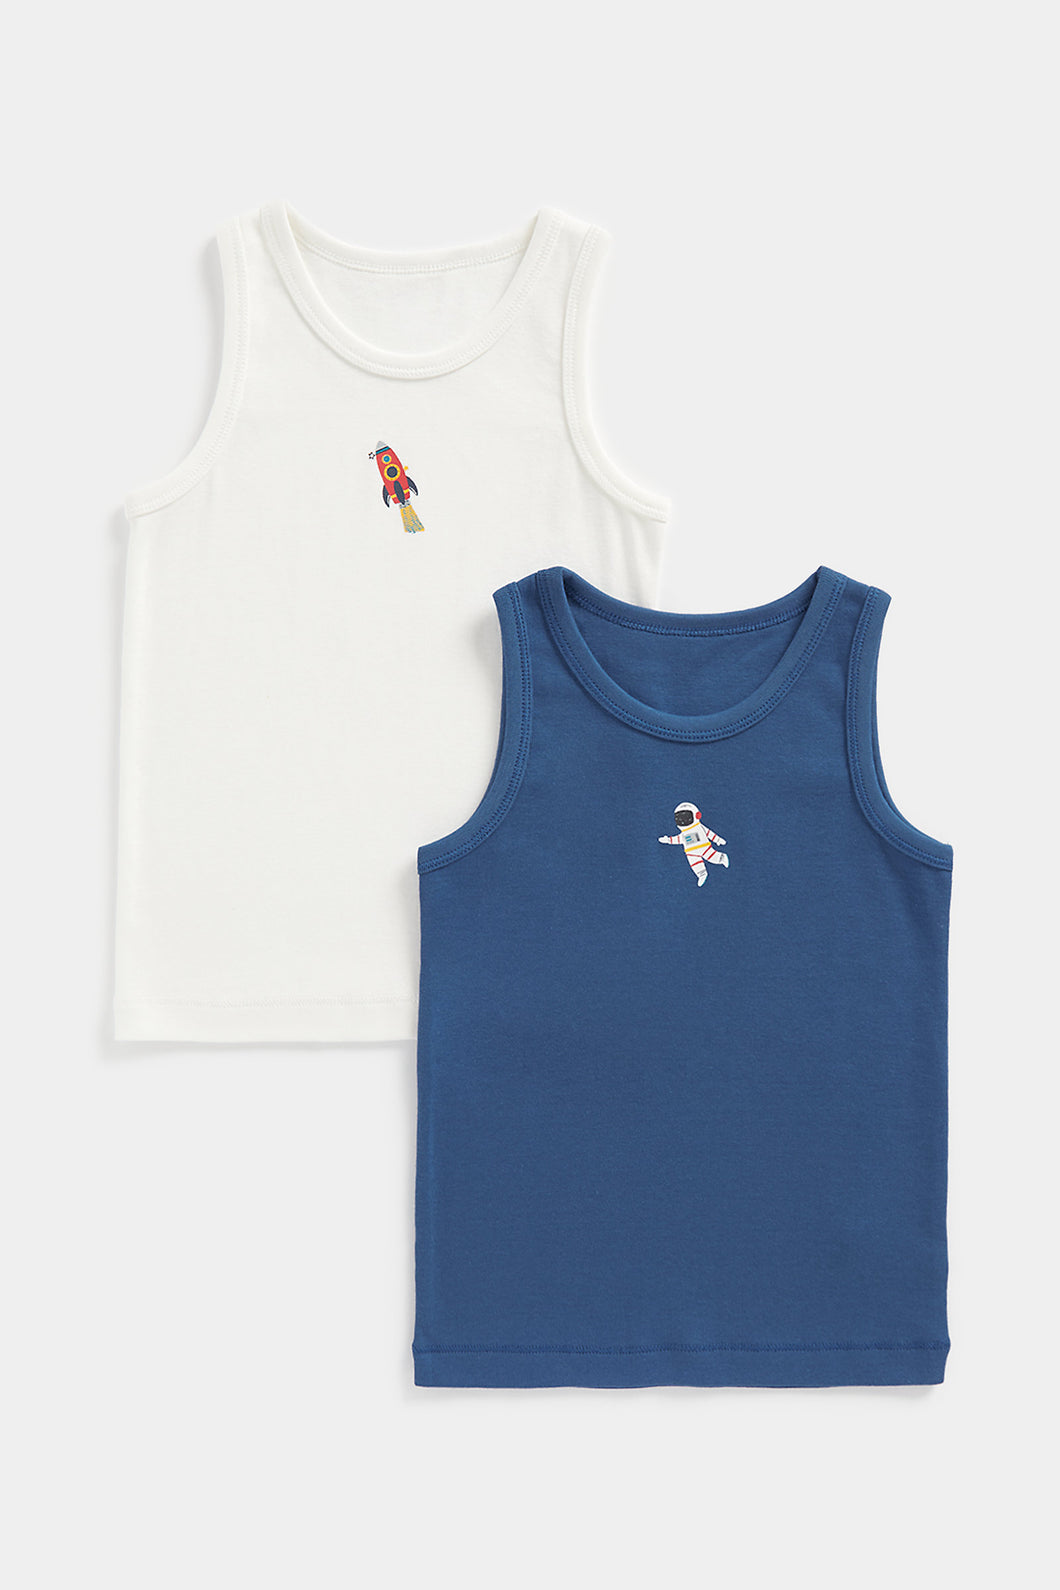 Mothercare Space Sleeveless Vests - 2 Pack